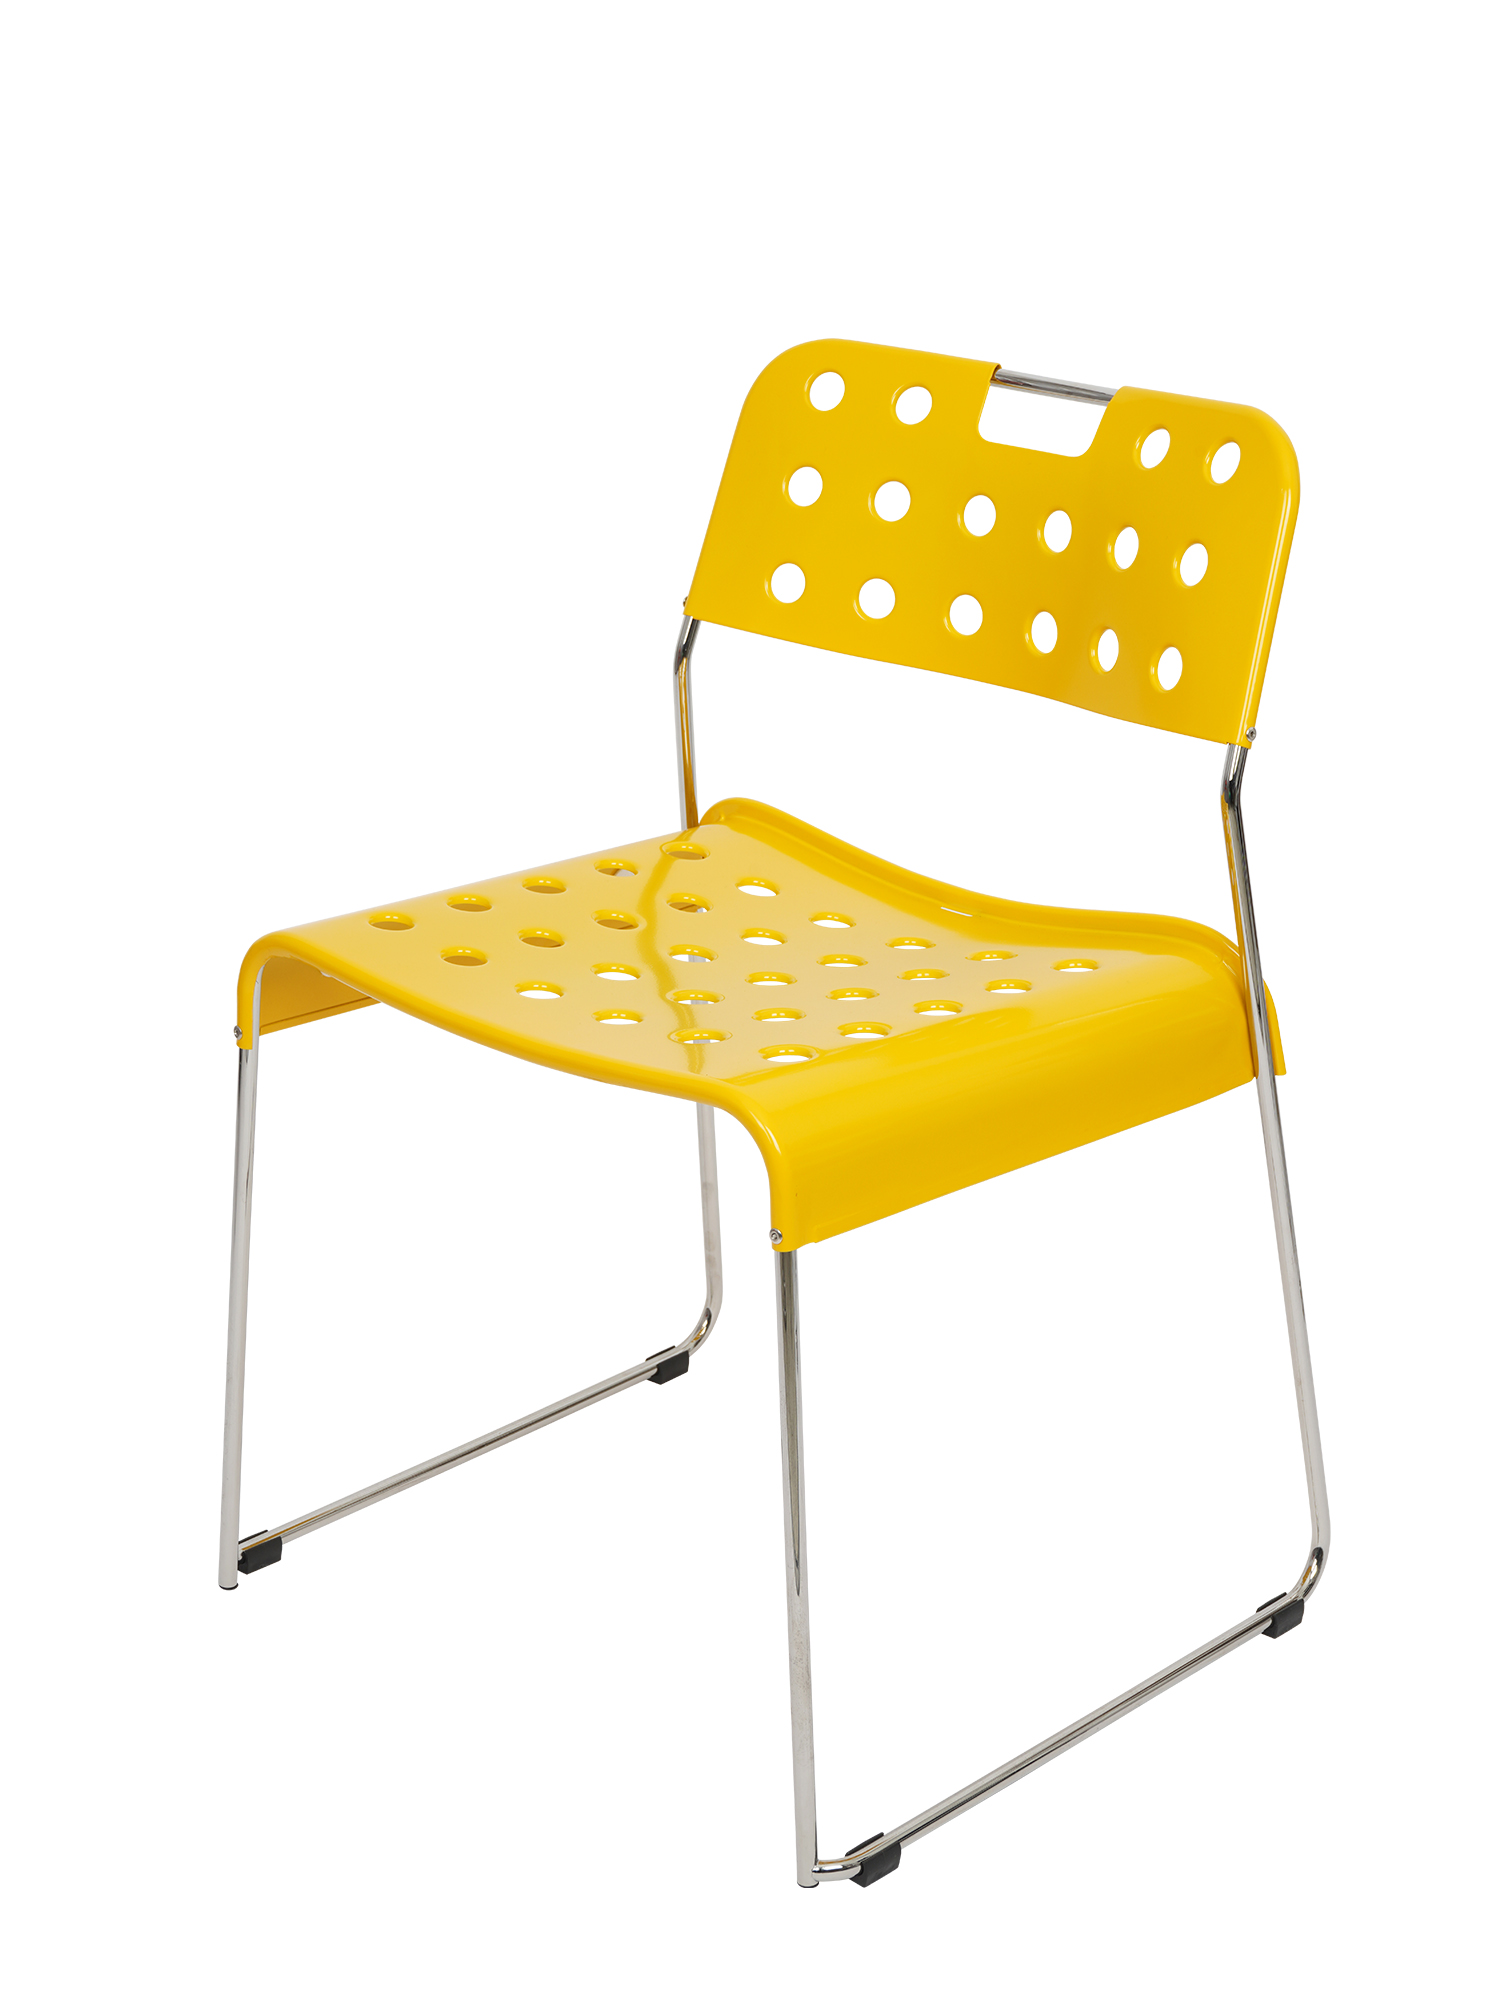 [OMK] Omkstak Side Chair Signal Yellow